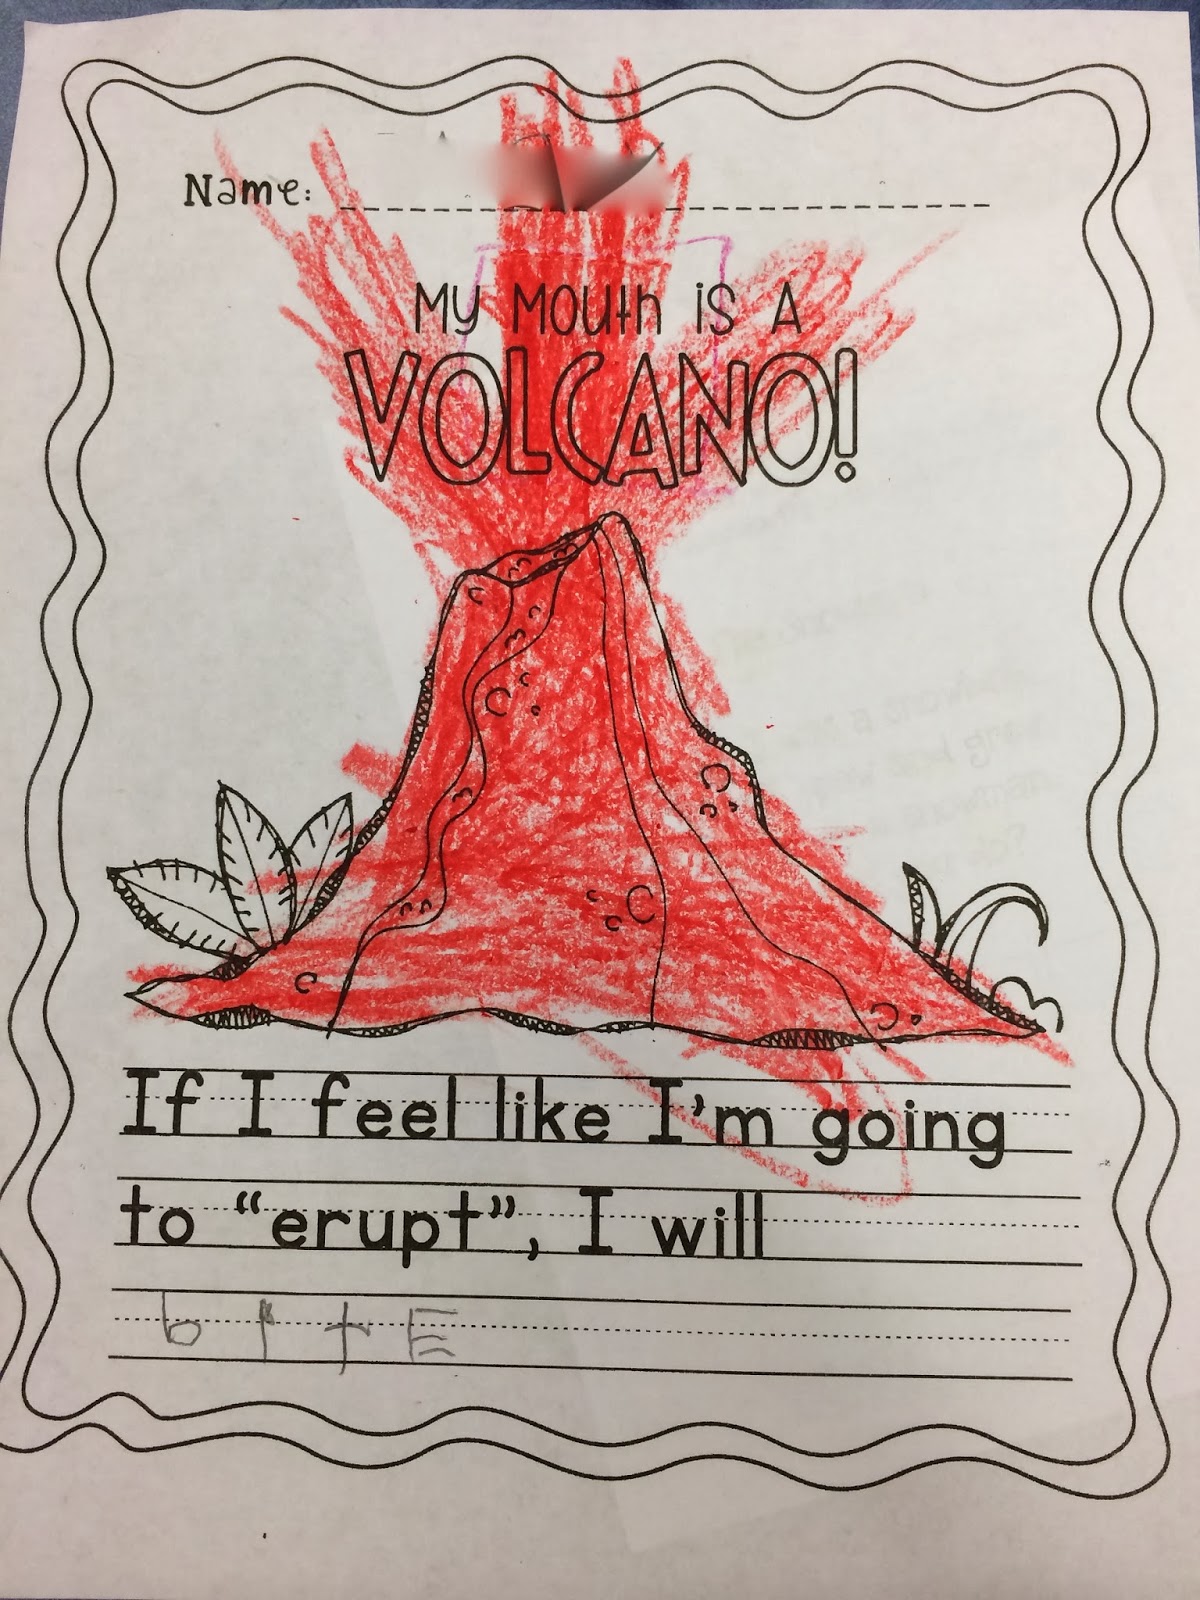 Ms. Sepp's Counselor Corner: My Mouth is a Volcano